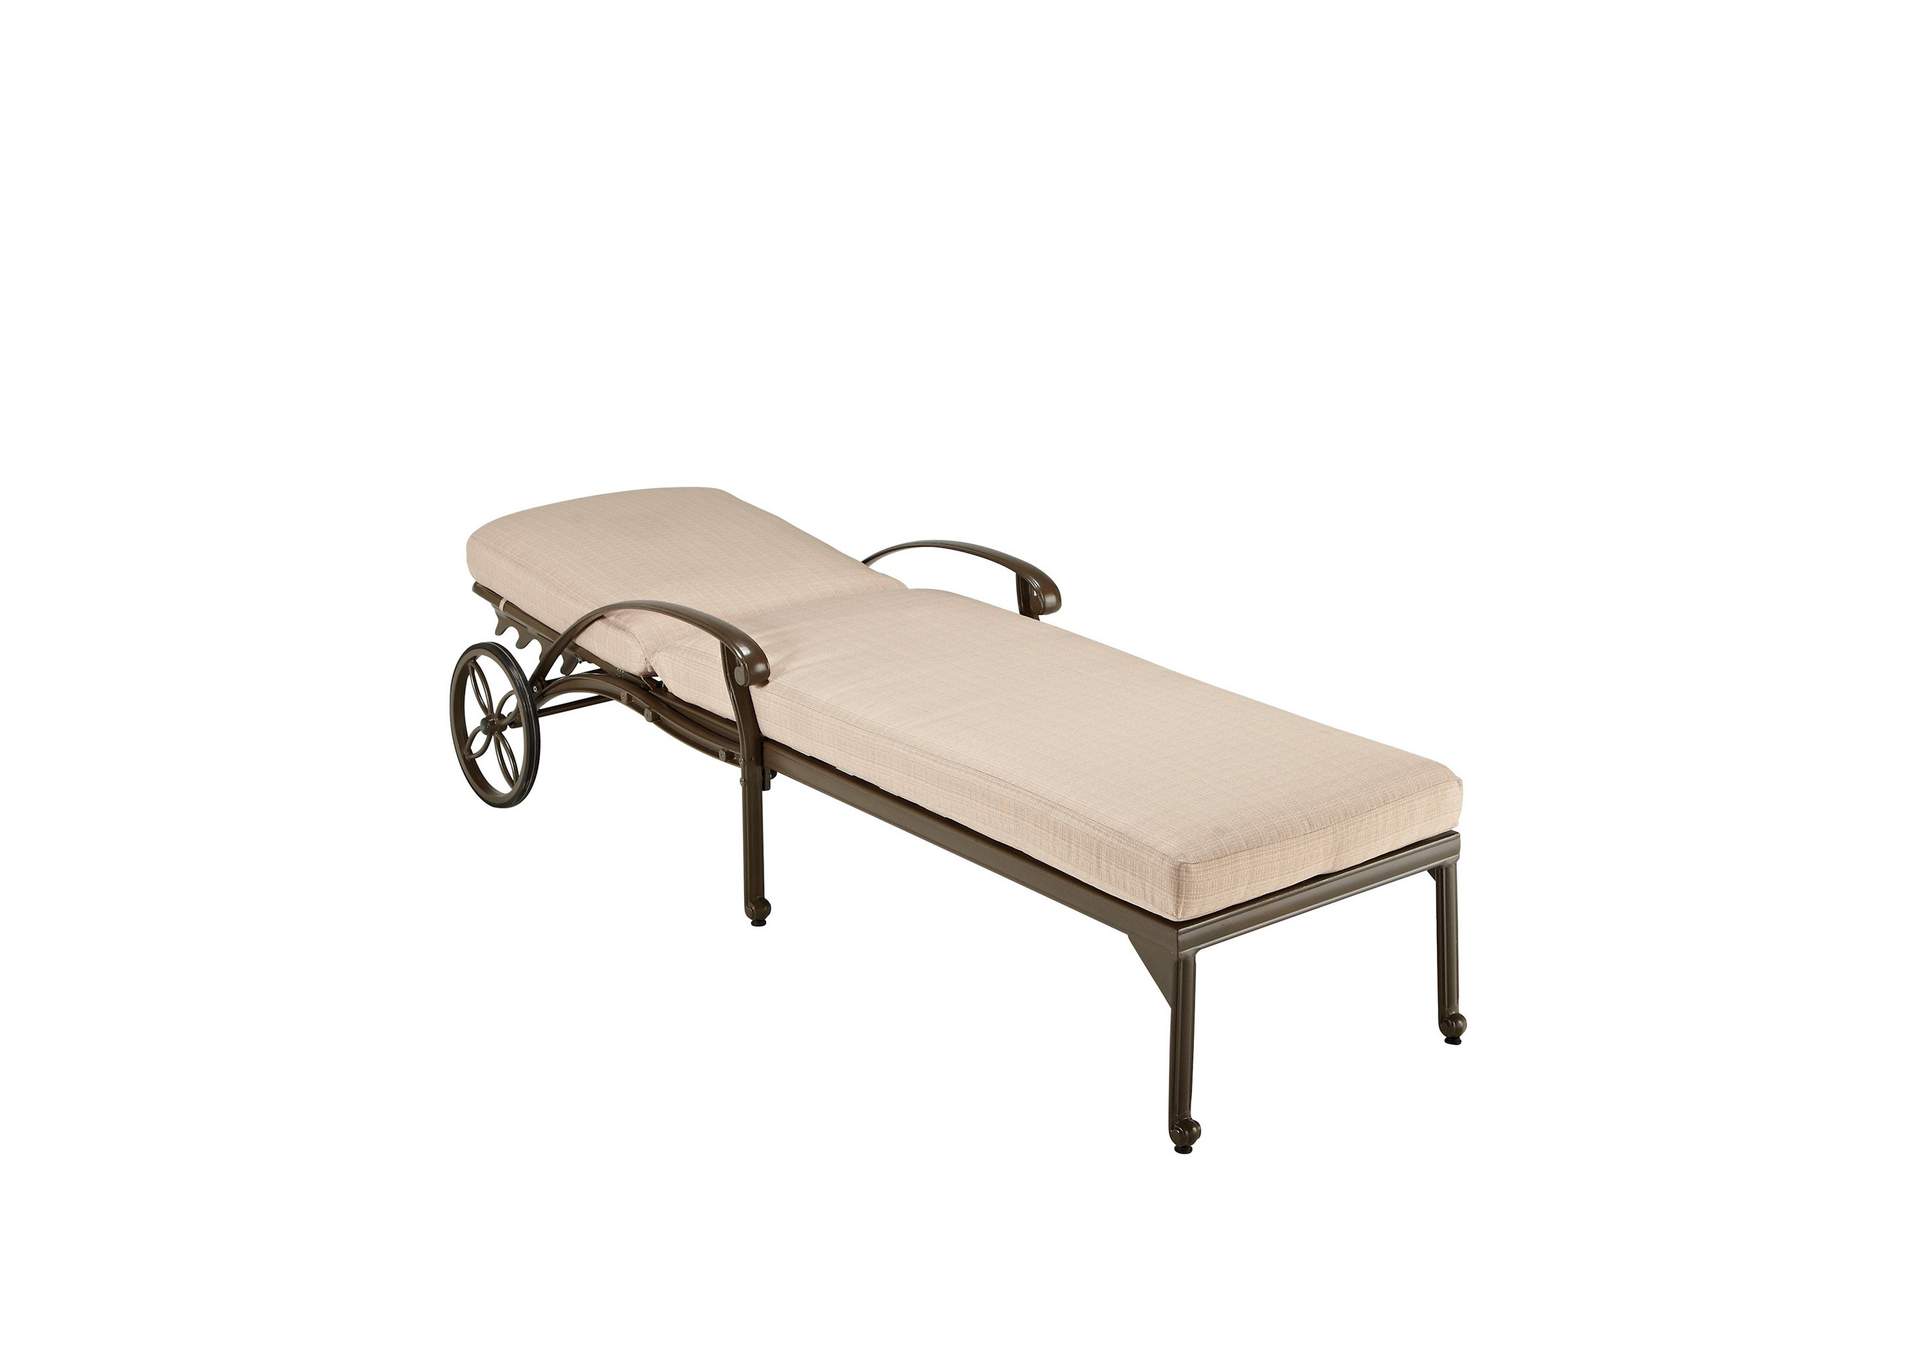 Capri Outdoor Chaise Lounge By Homestyles,Homestyles